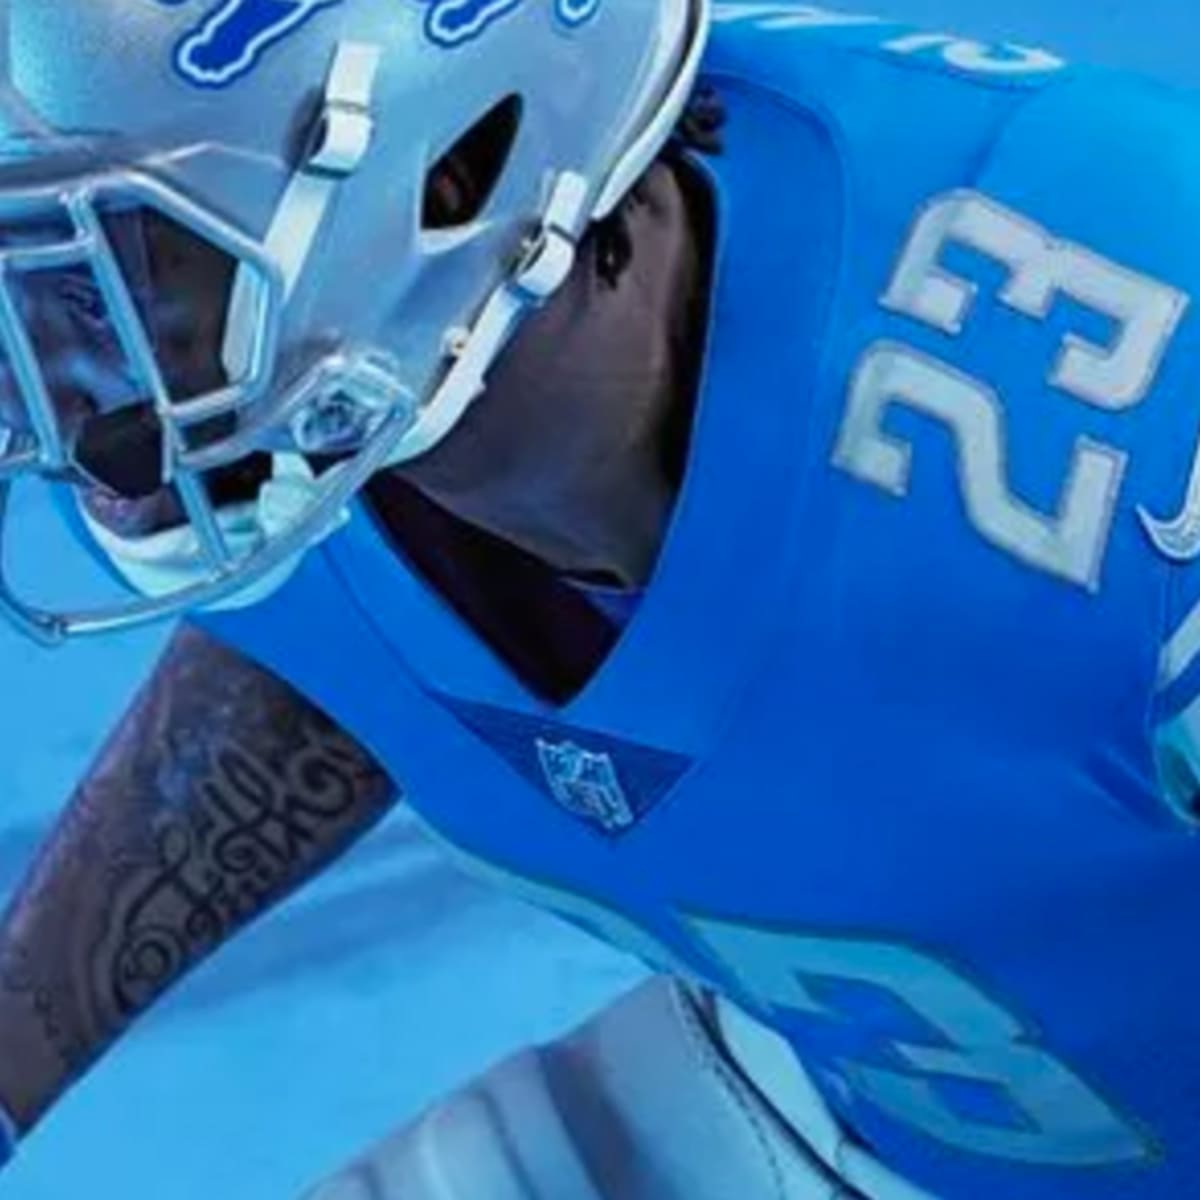 Why do the Lions wear WCF on their jerseys? - Sports Illustrated